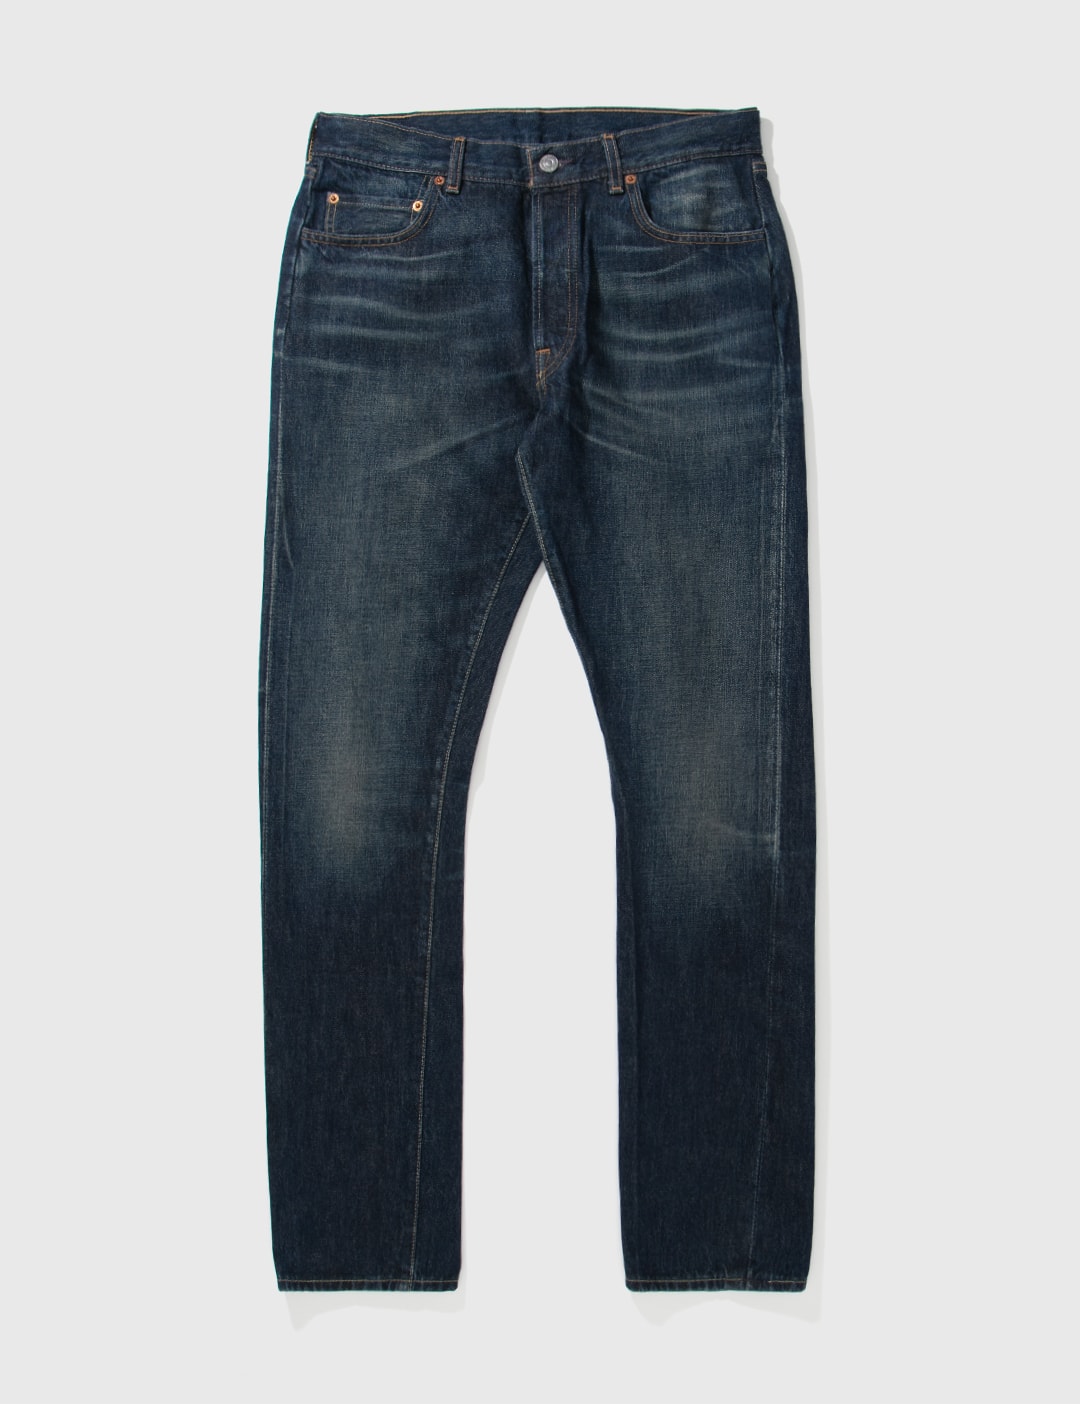 Levi's - LEVIS 501 VINTAGE 1966 CUSTOMEIZED JEANS | HBX - Globally Curated  Fashion and Lifestyle by Hypebeast